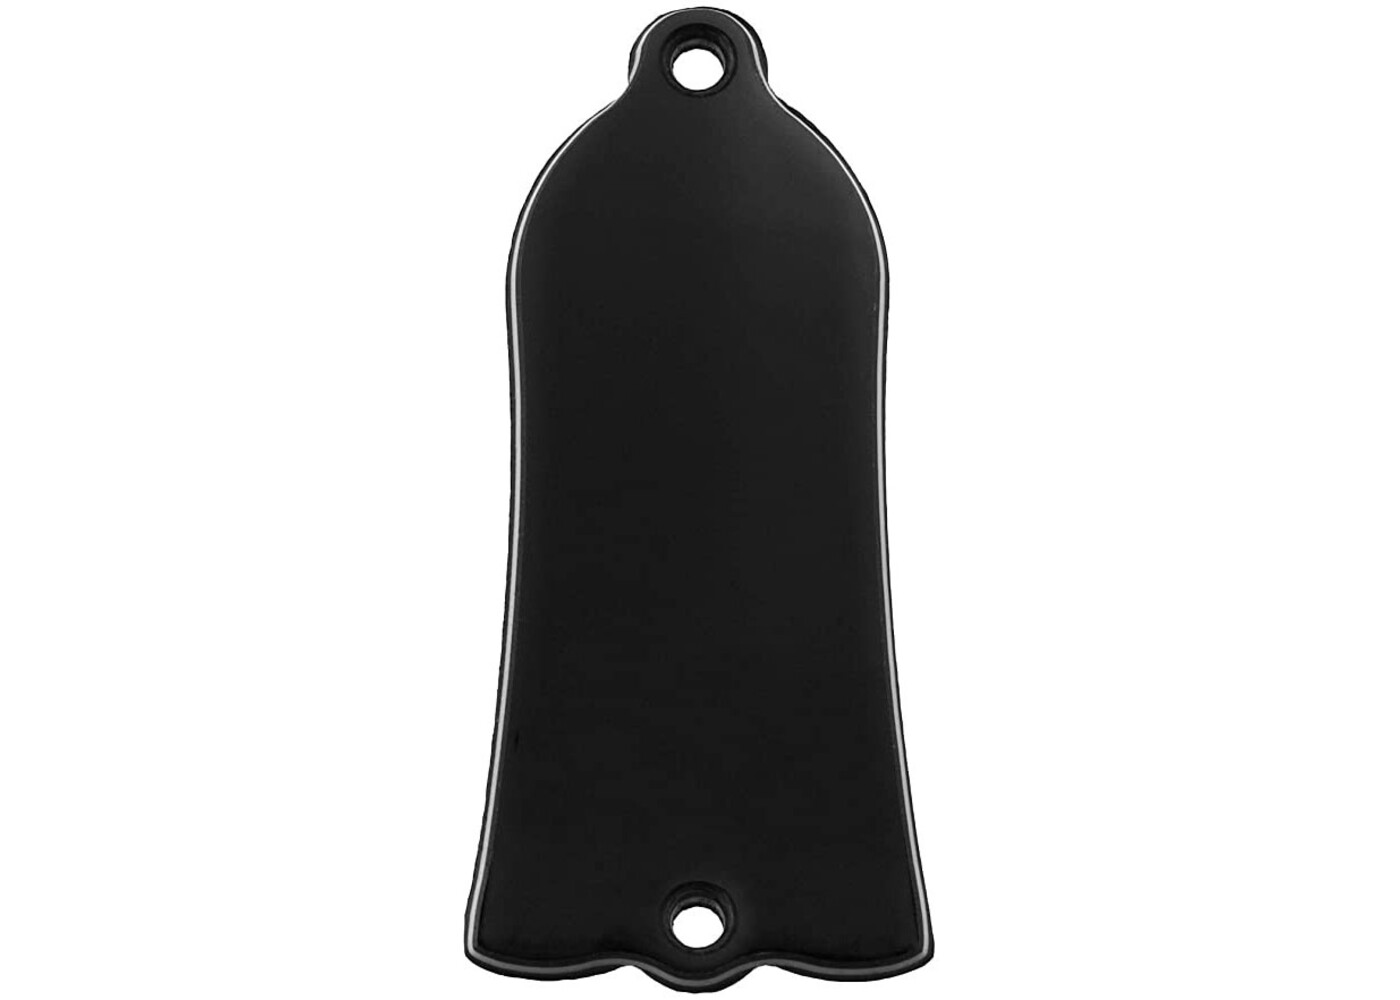 Allparts Allparts Gibson Truss Rod Cover, Black w/ White Outline